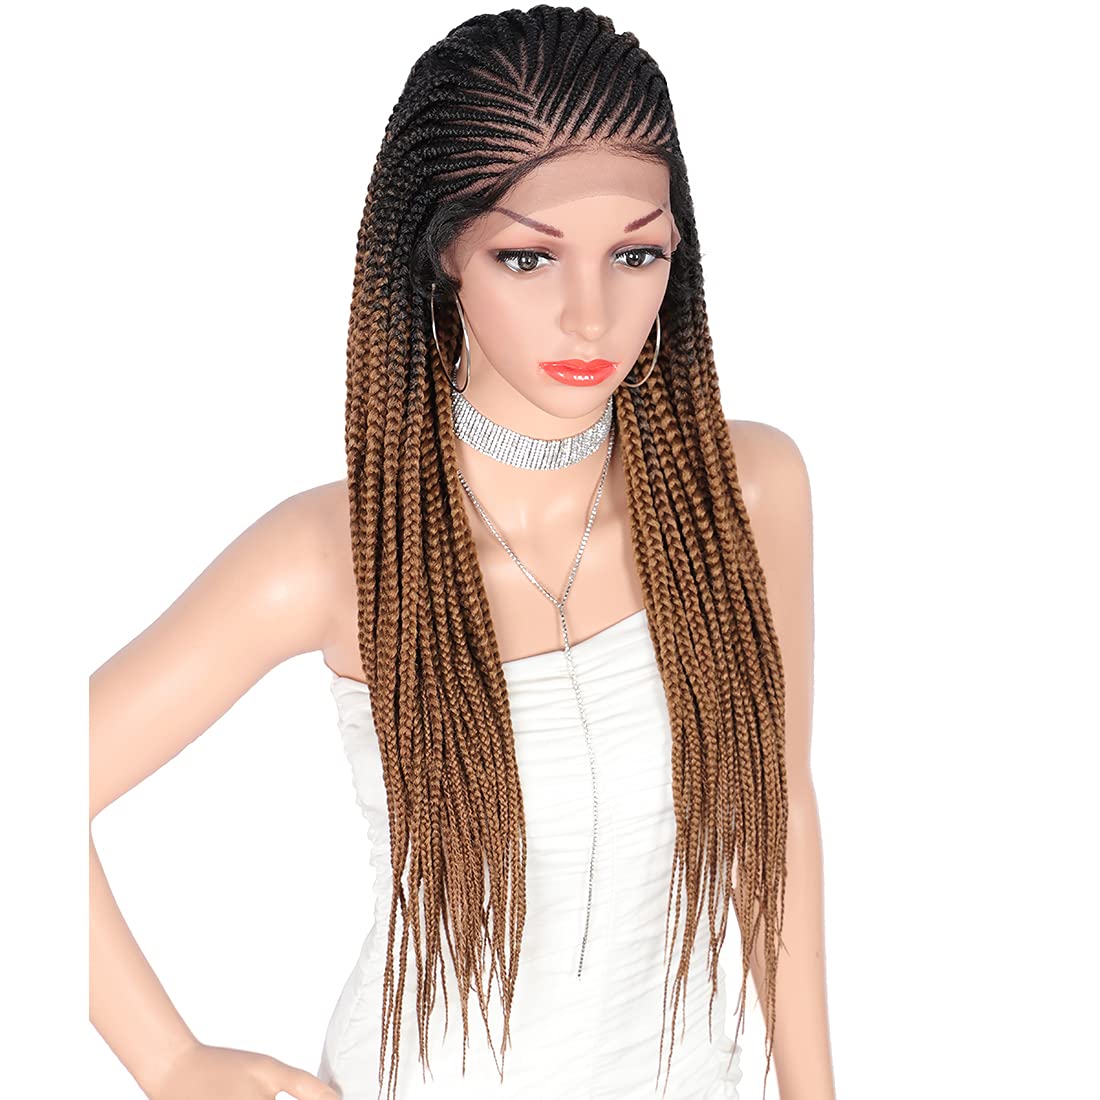 Braided Lace Wigs Baby Hair  Braid Wigs Lace Front Wig - Synthetic Lace  Wigs(for Black) - Aliexpress